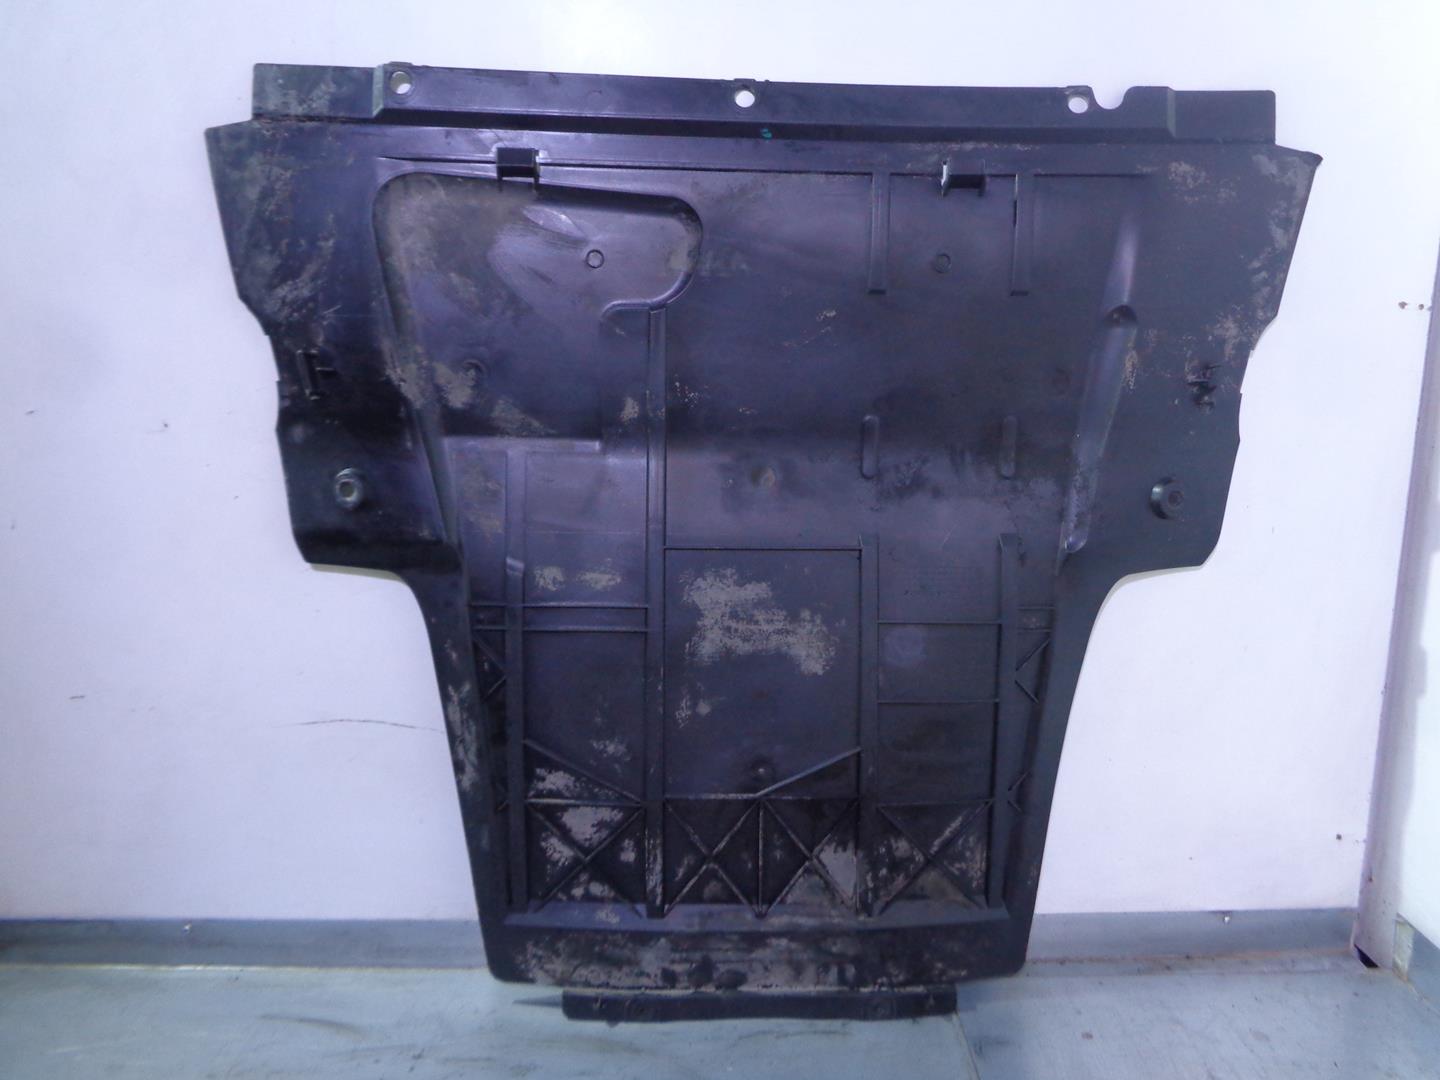 RENAULT Scenic 2 generation (2003-2010) Front Engine Cover 8200115689, 8200115687, CESTA38 21730938